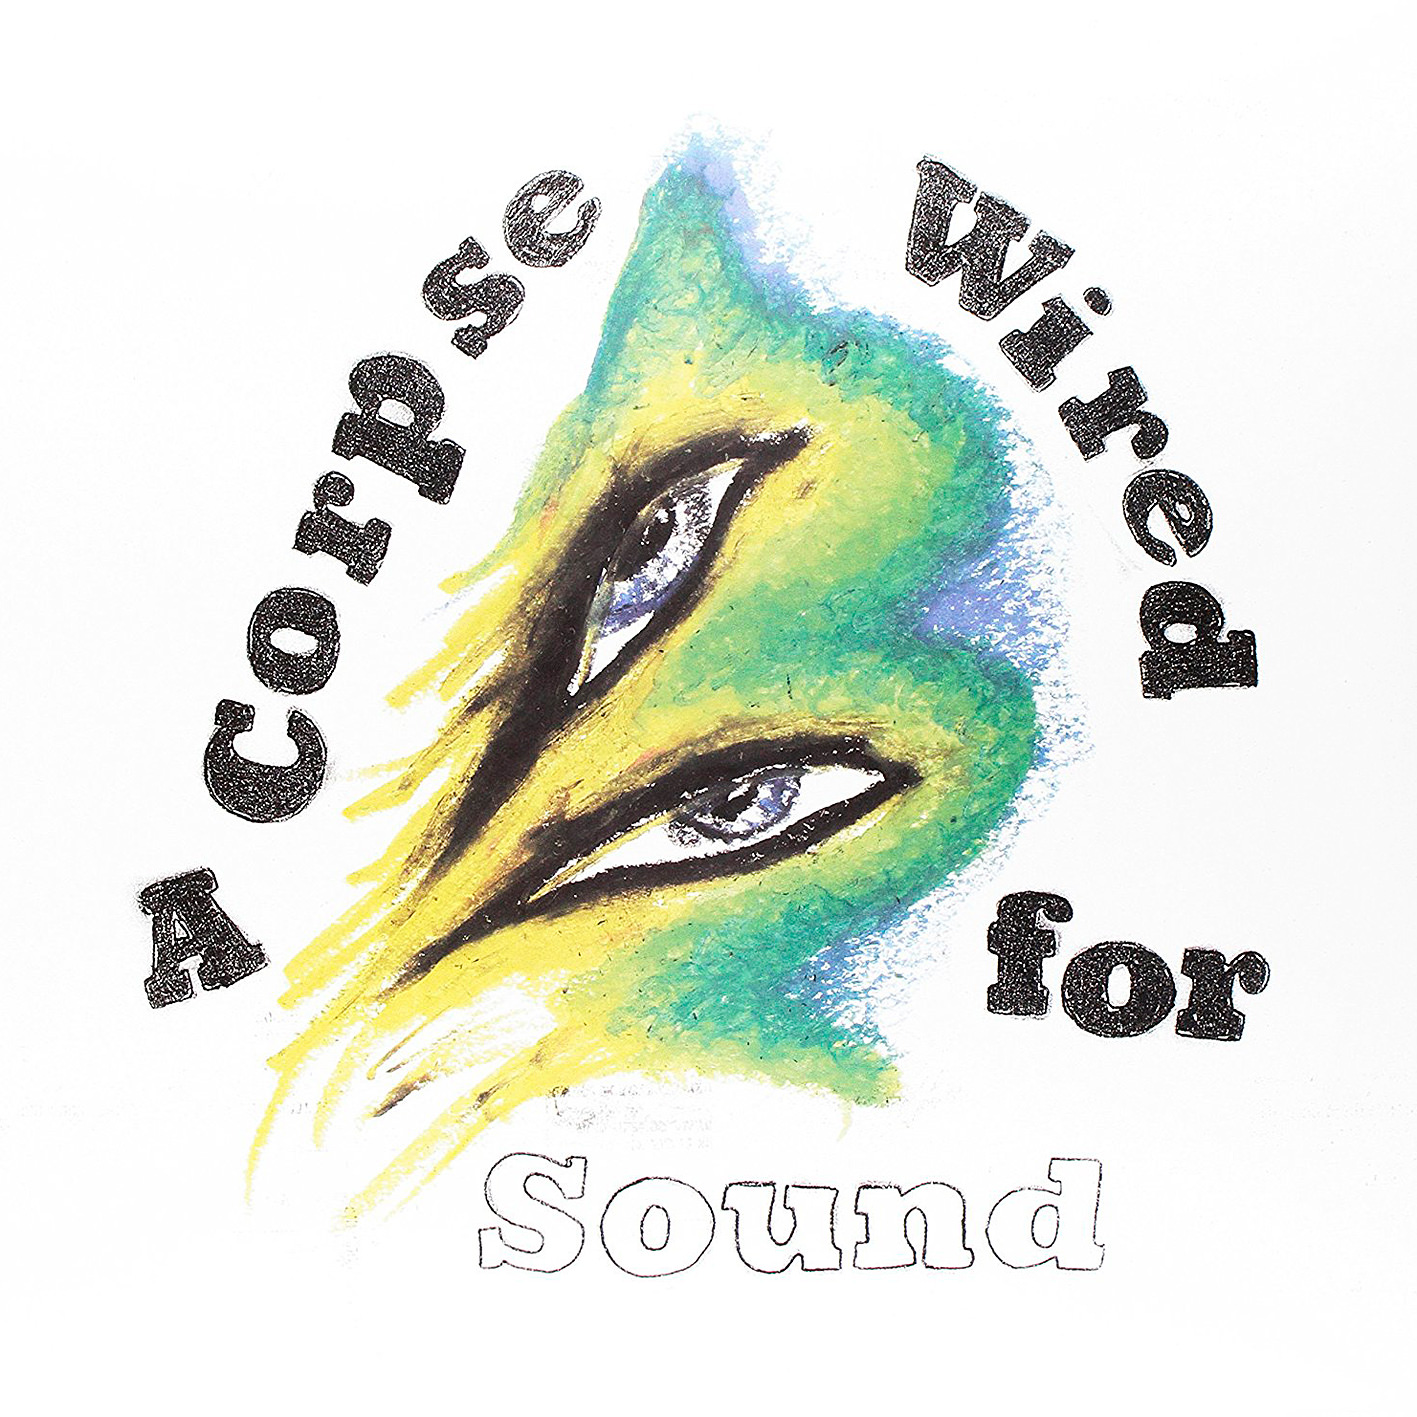 Merchandise - A Corpse Wired For Sound (2016) [HDTracks FLAC 24bit/96kHz]